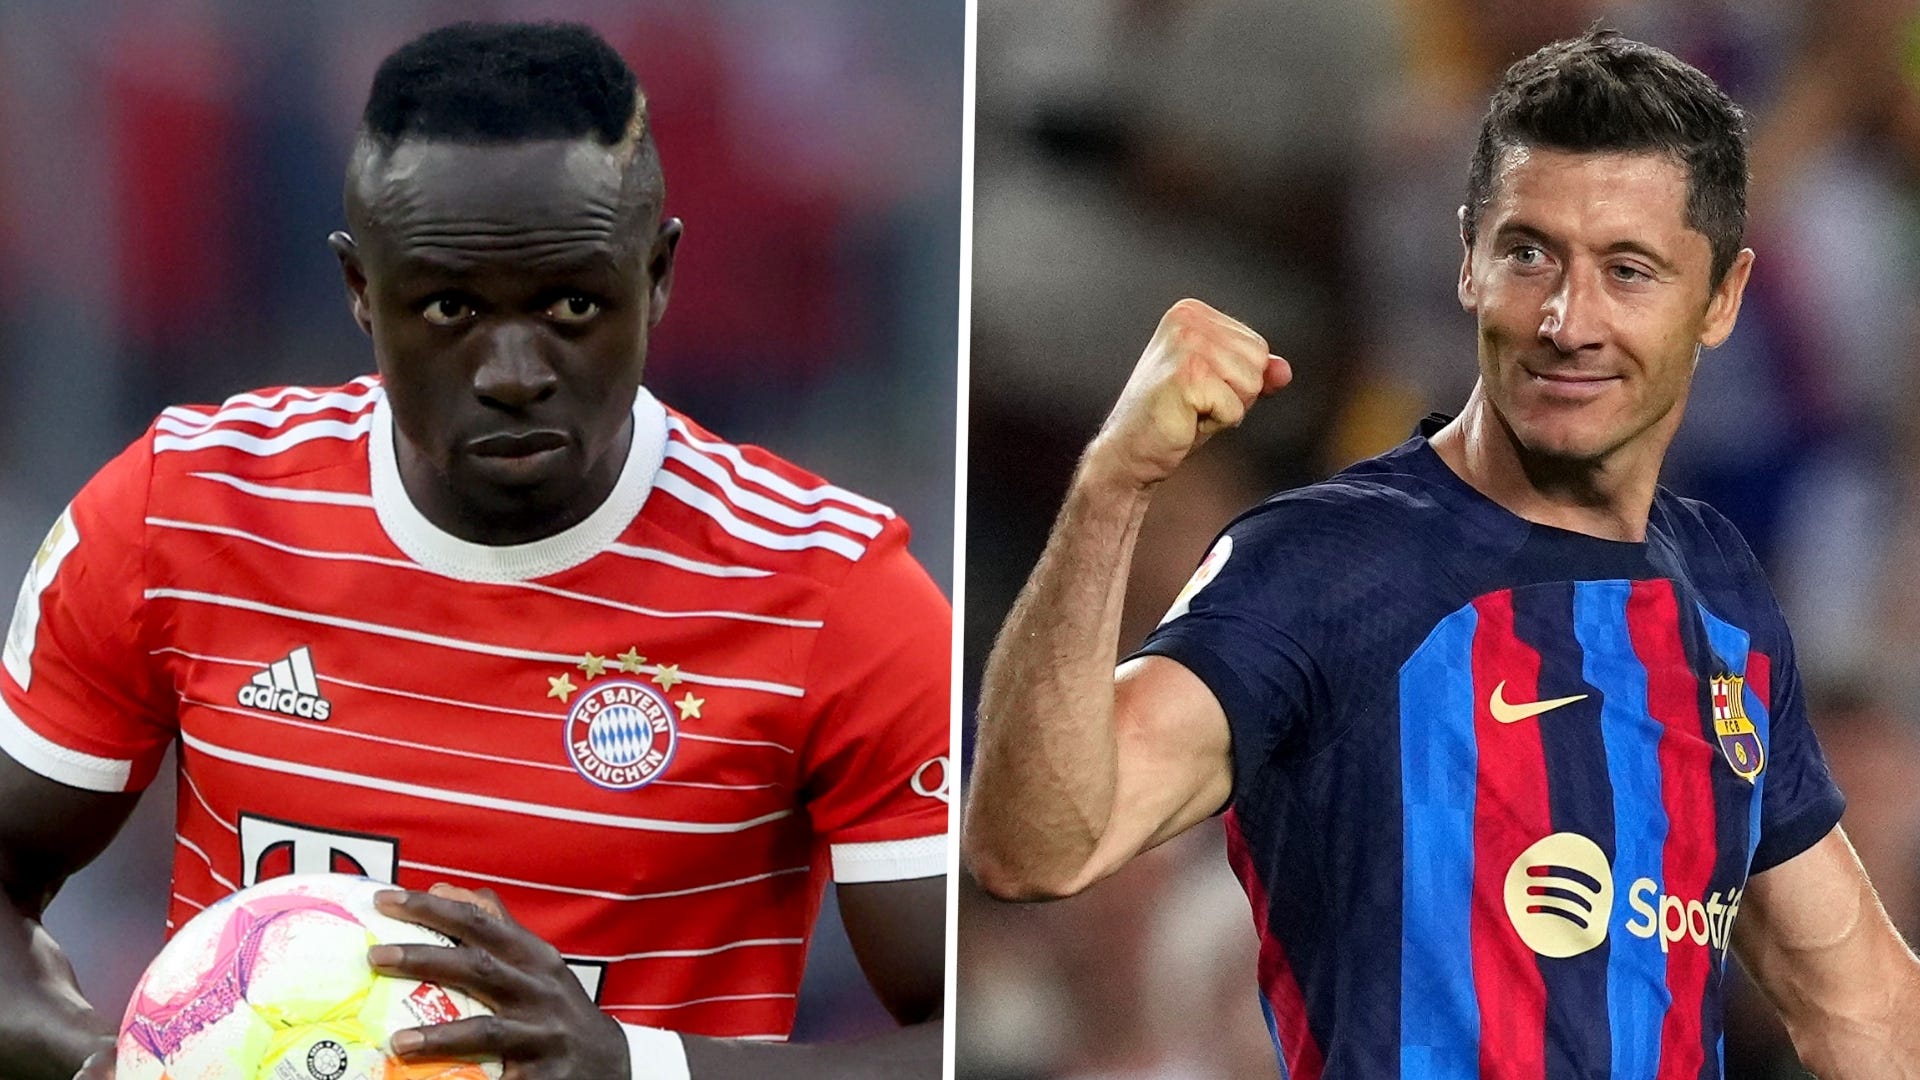 Bayern Munich vs Barcelona Live stream, TV channel, kick-off time and where to watch Goal English Bahrain